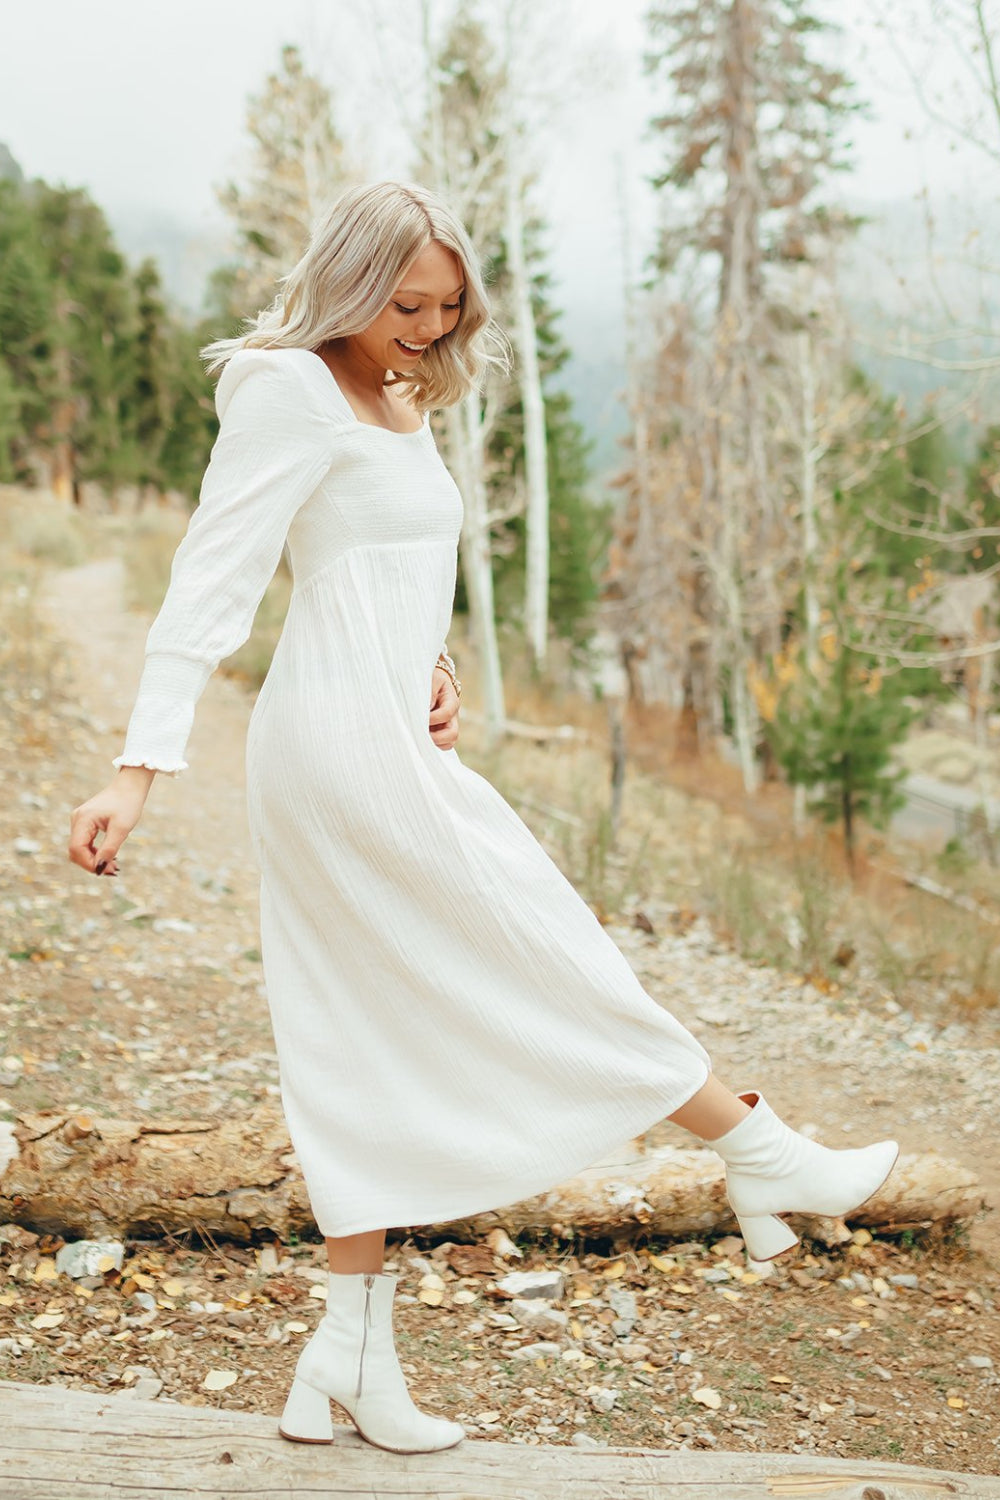 The perfect white dress does exist, and @jacylenore found it. Meet